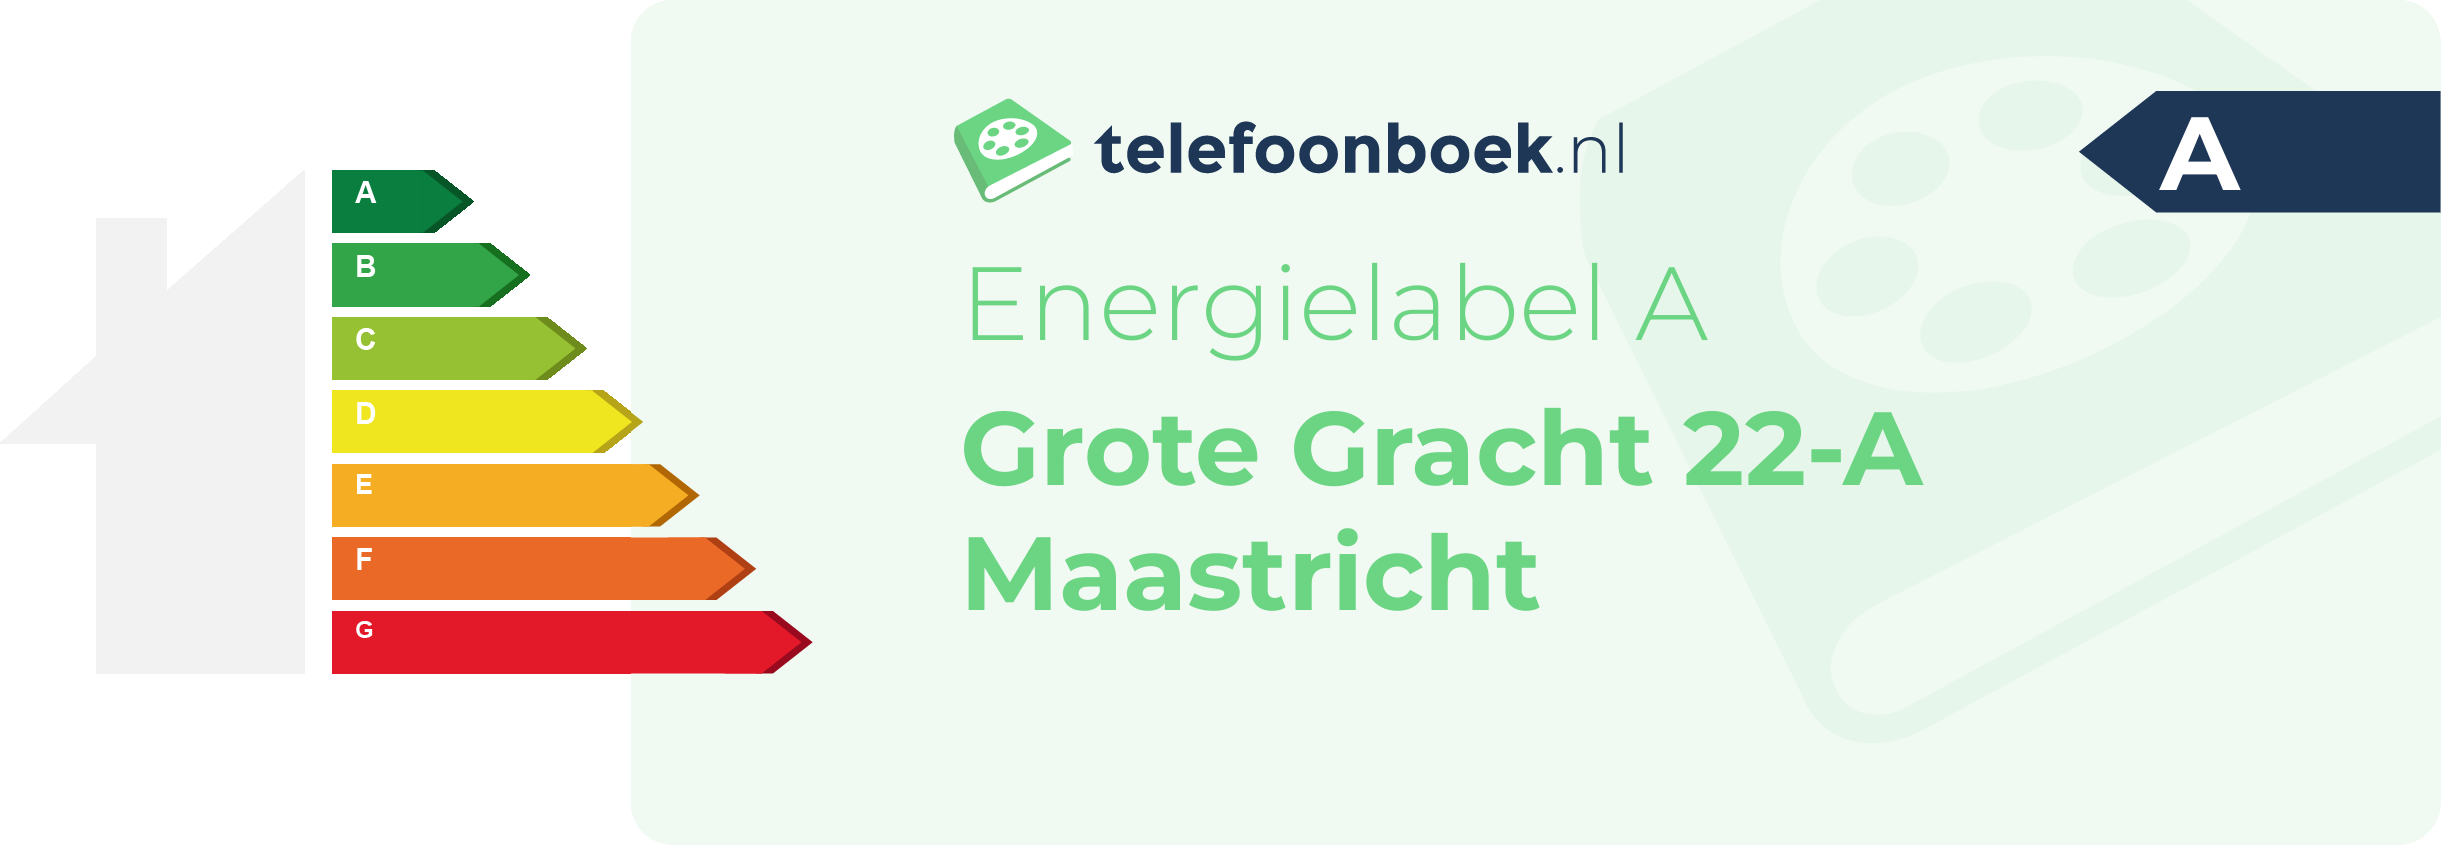 Energielabel Grote Gracht 22-A Maastricht